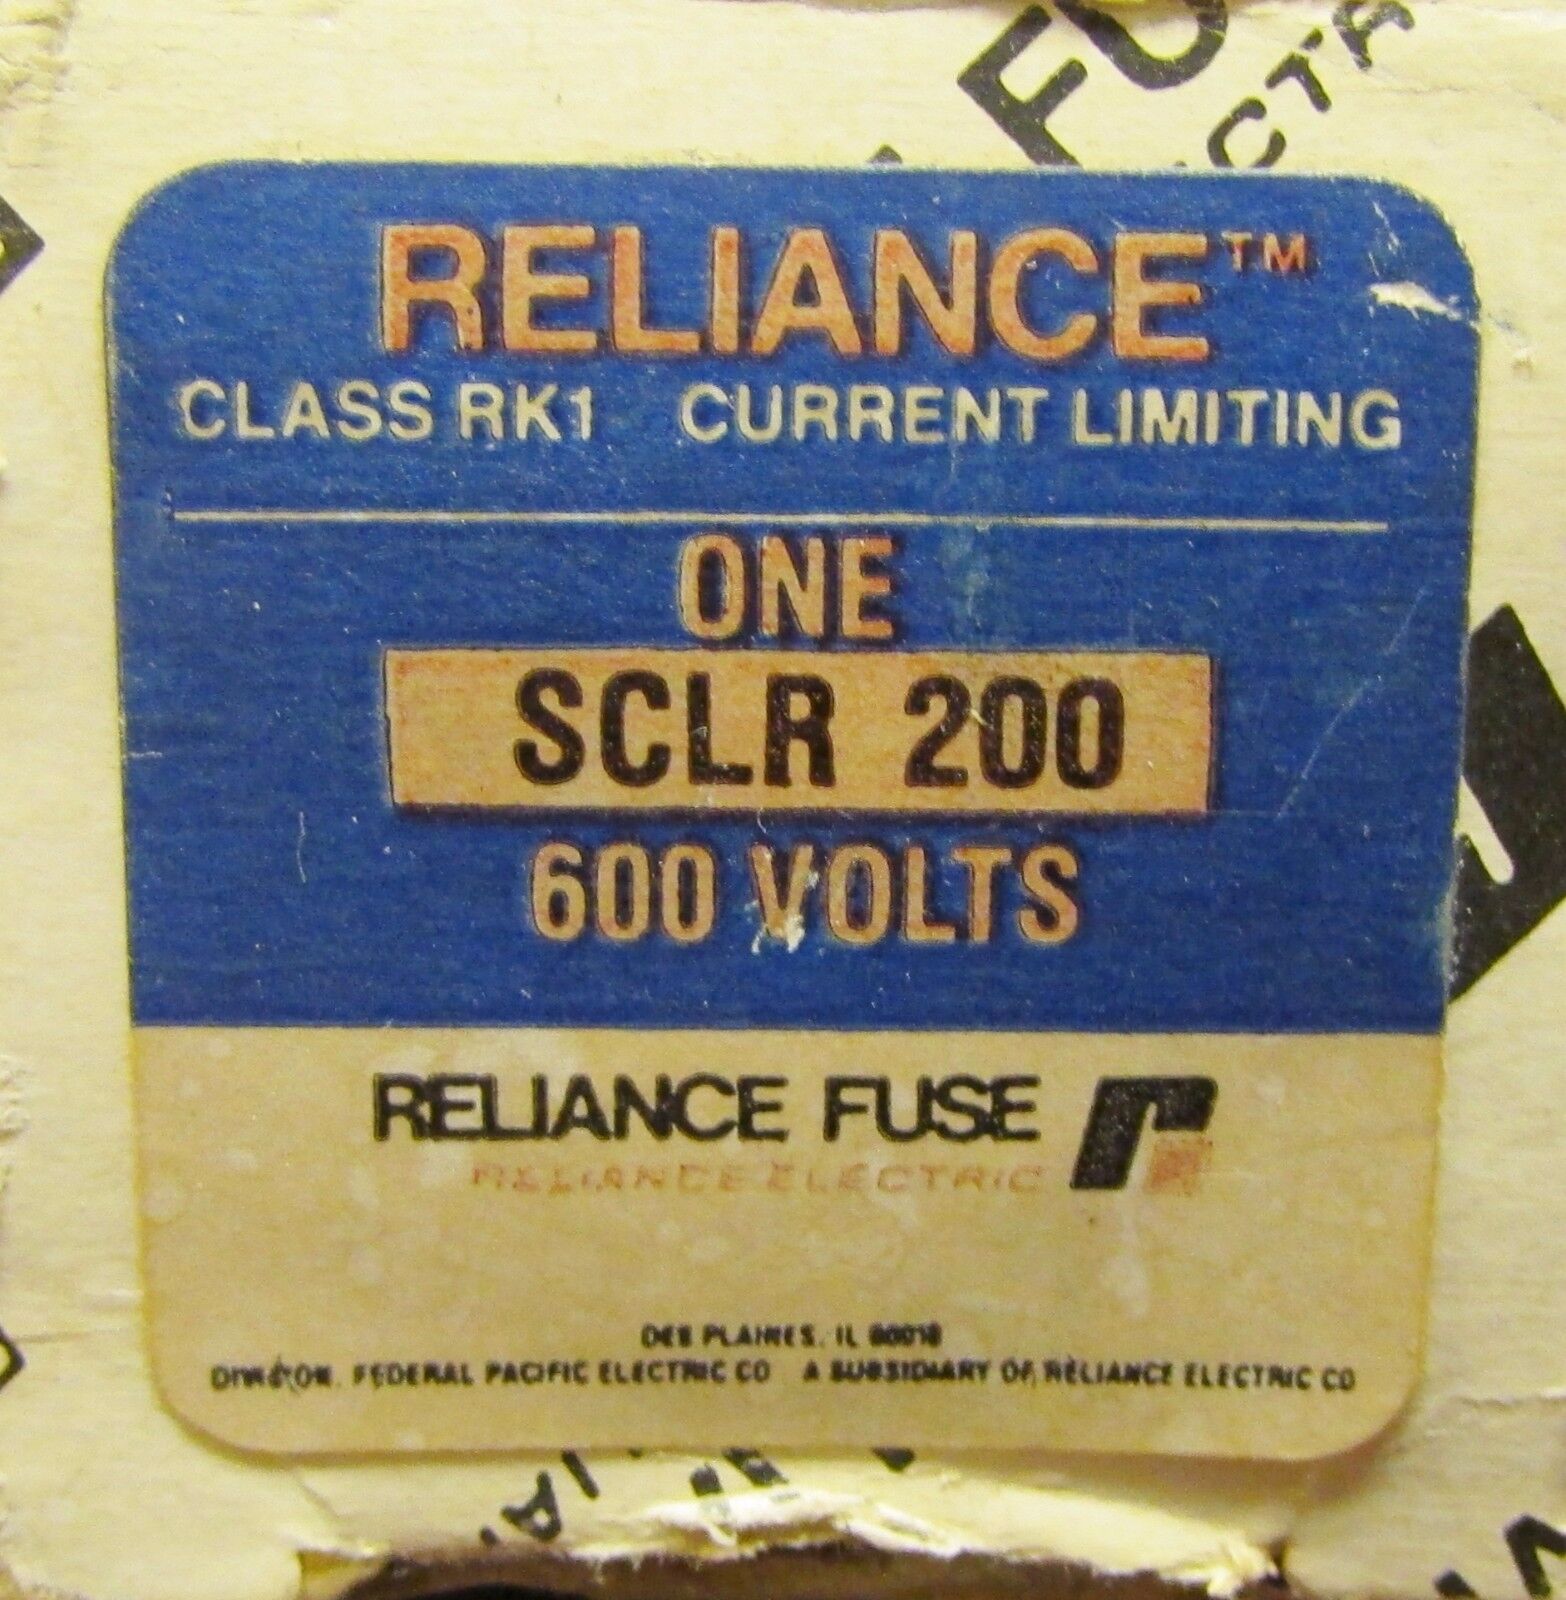 RELIANCE BRUSH Class RK1 600V 200 SCLR Fuse Ultra-Cheap Deals Amp Limited price